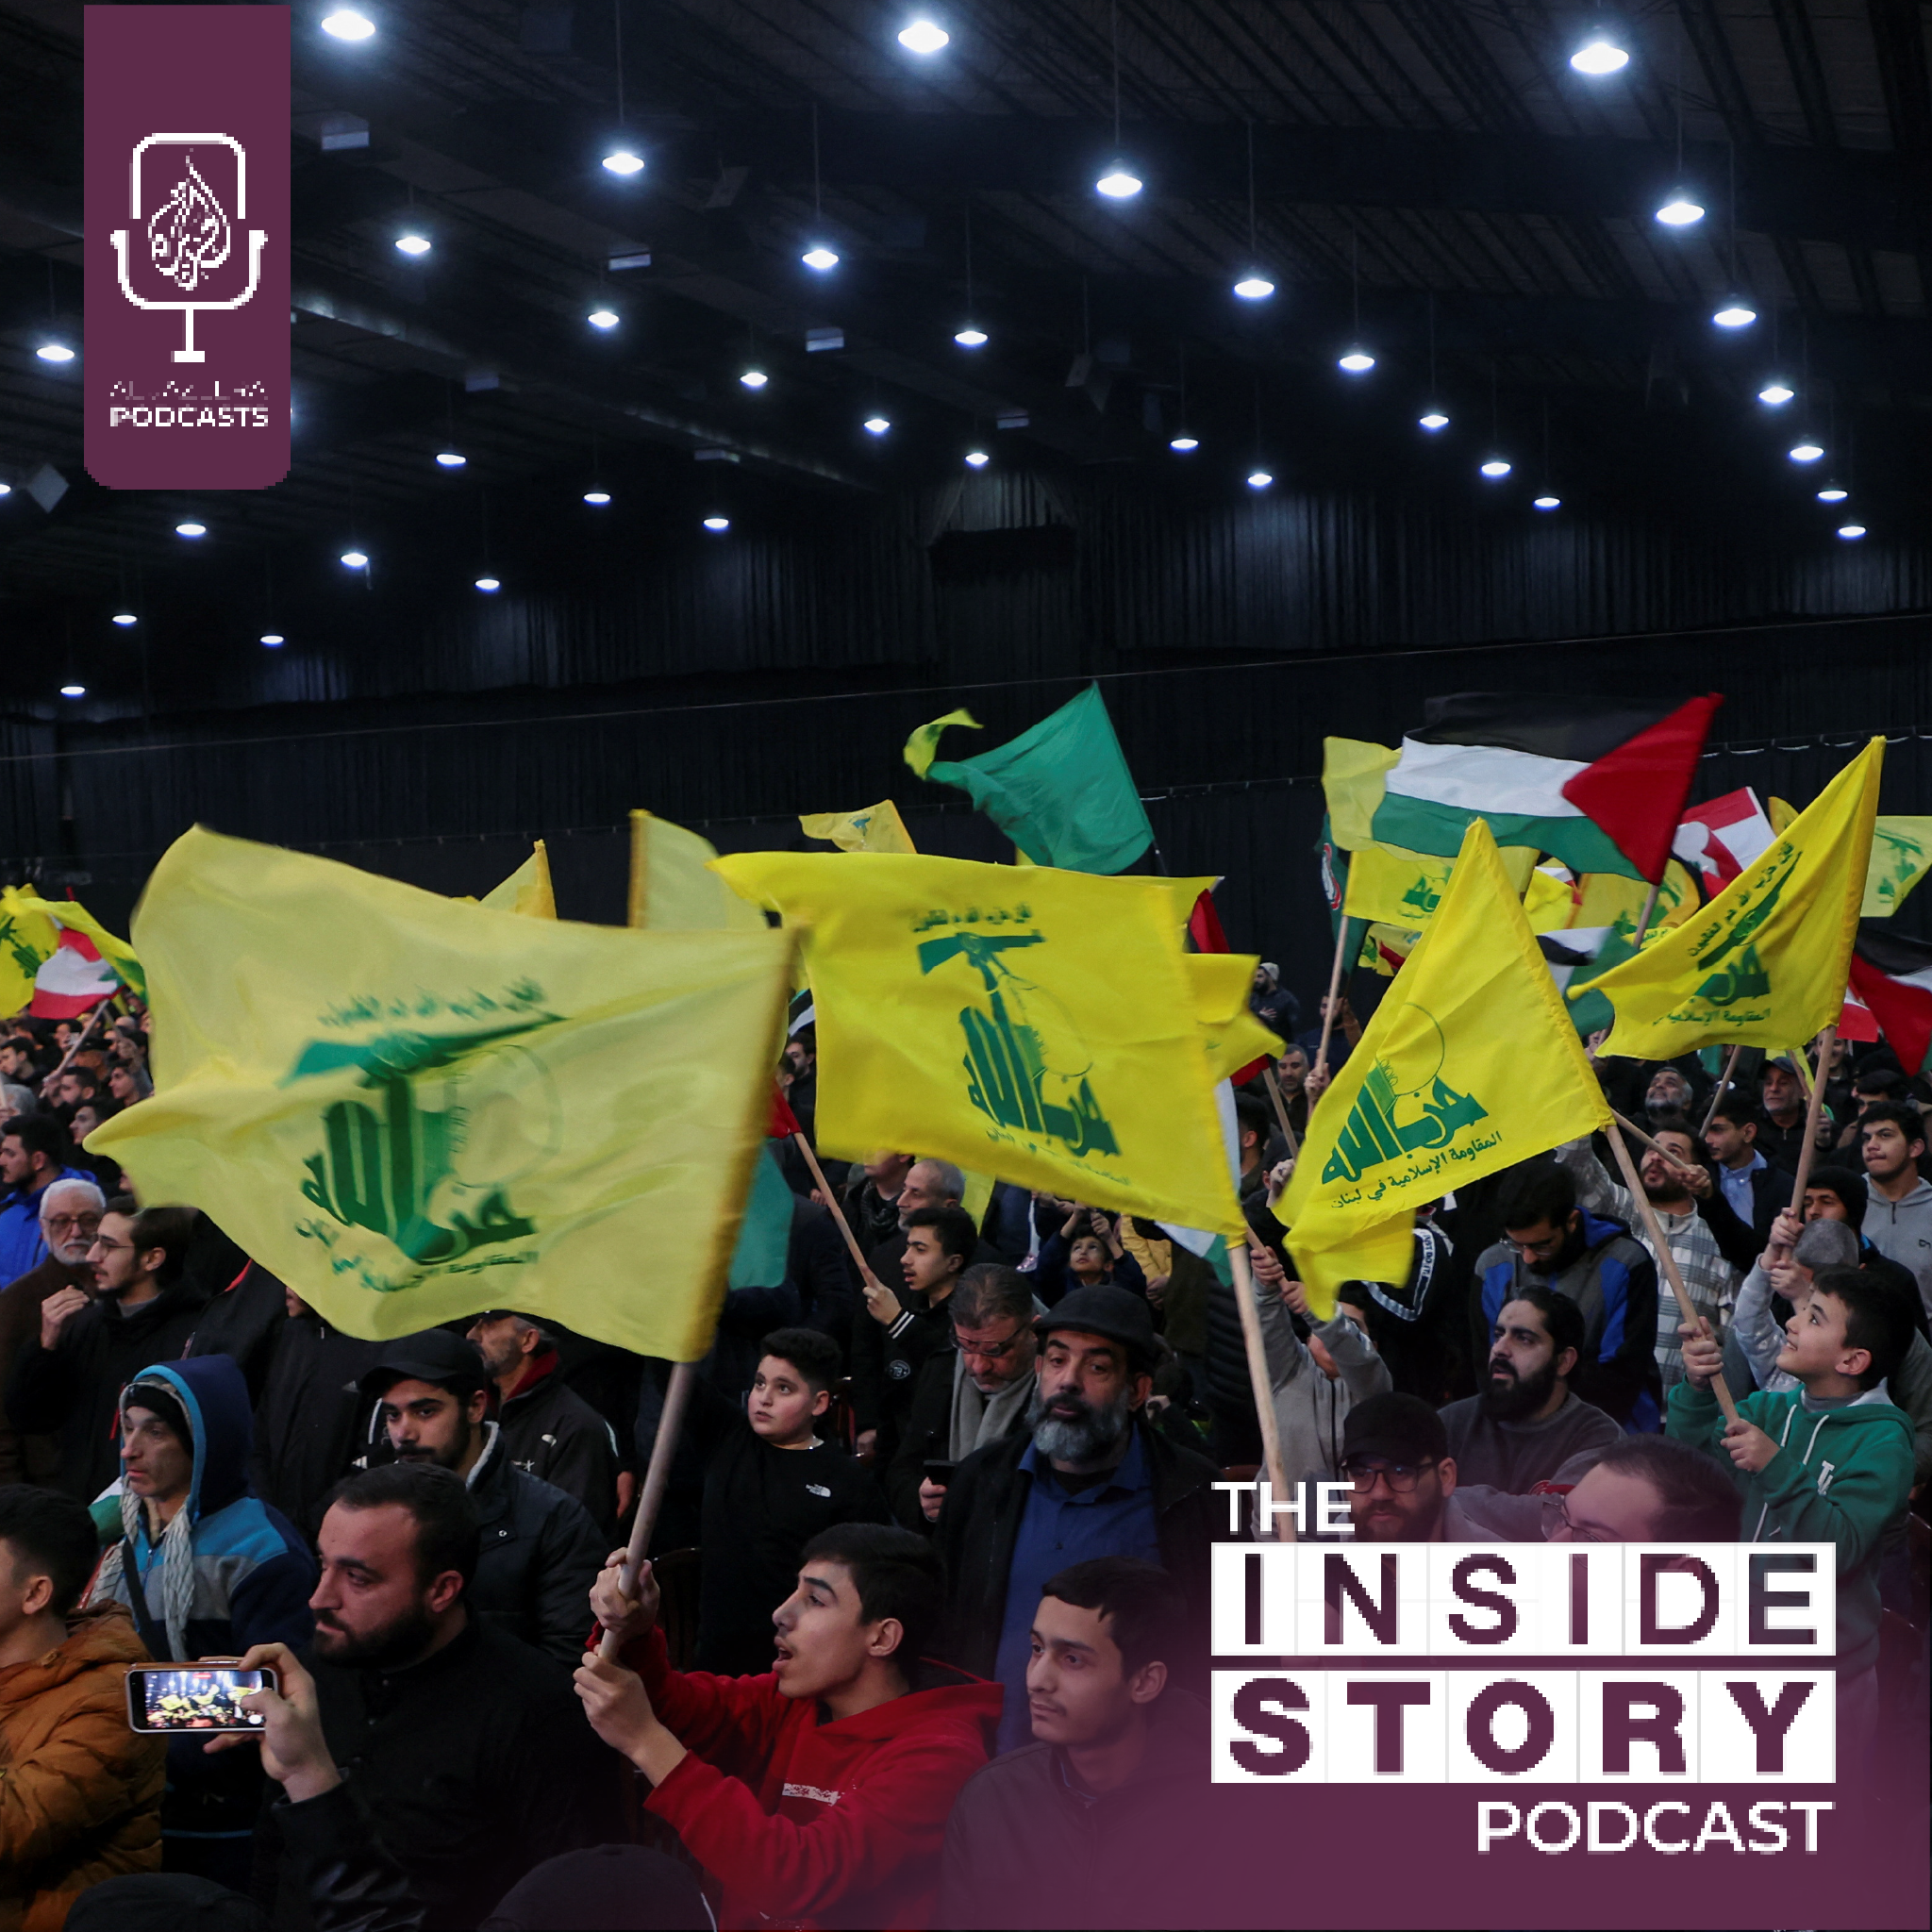 Could the Israel-Hezbollah conflict become regional?